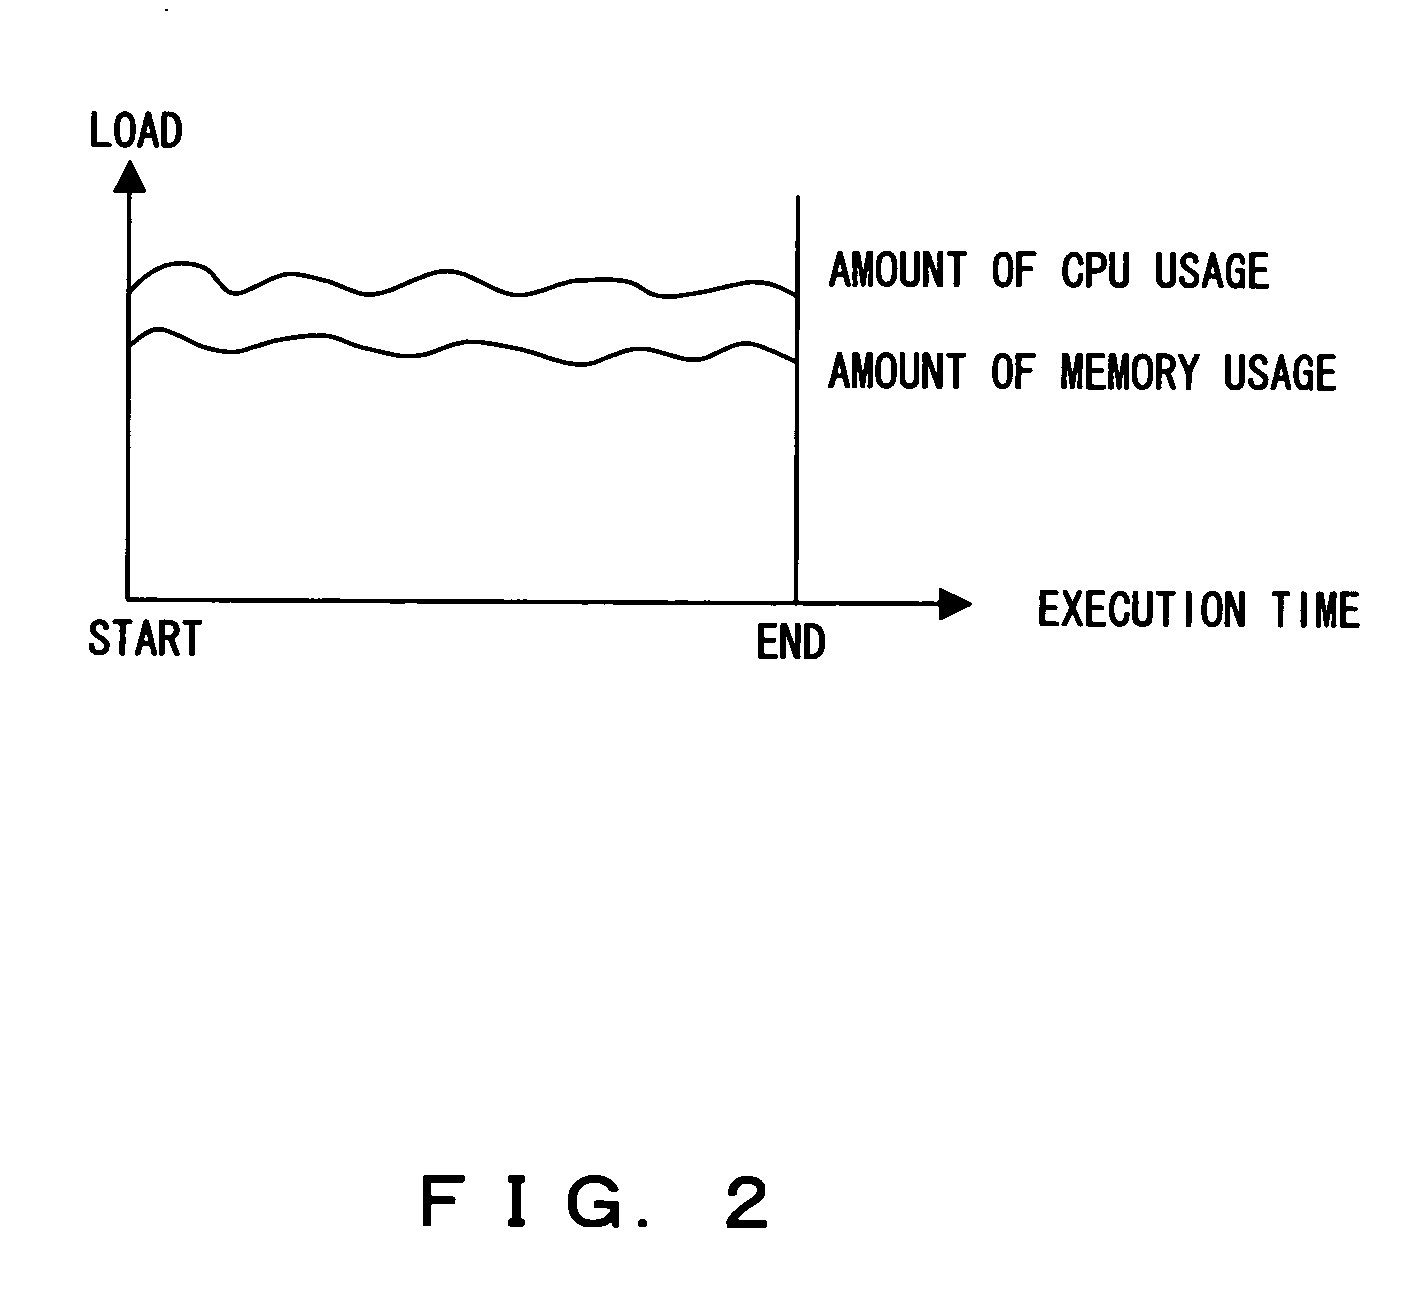 Program, apparatus and method for distributing batch job in multiple server environment